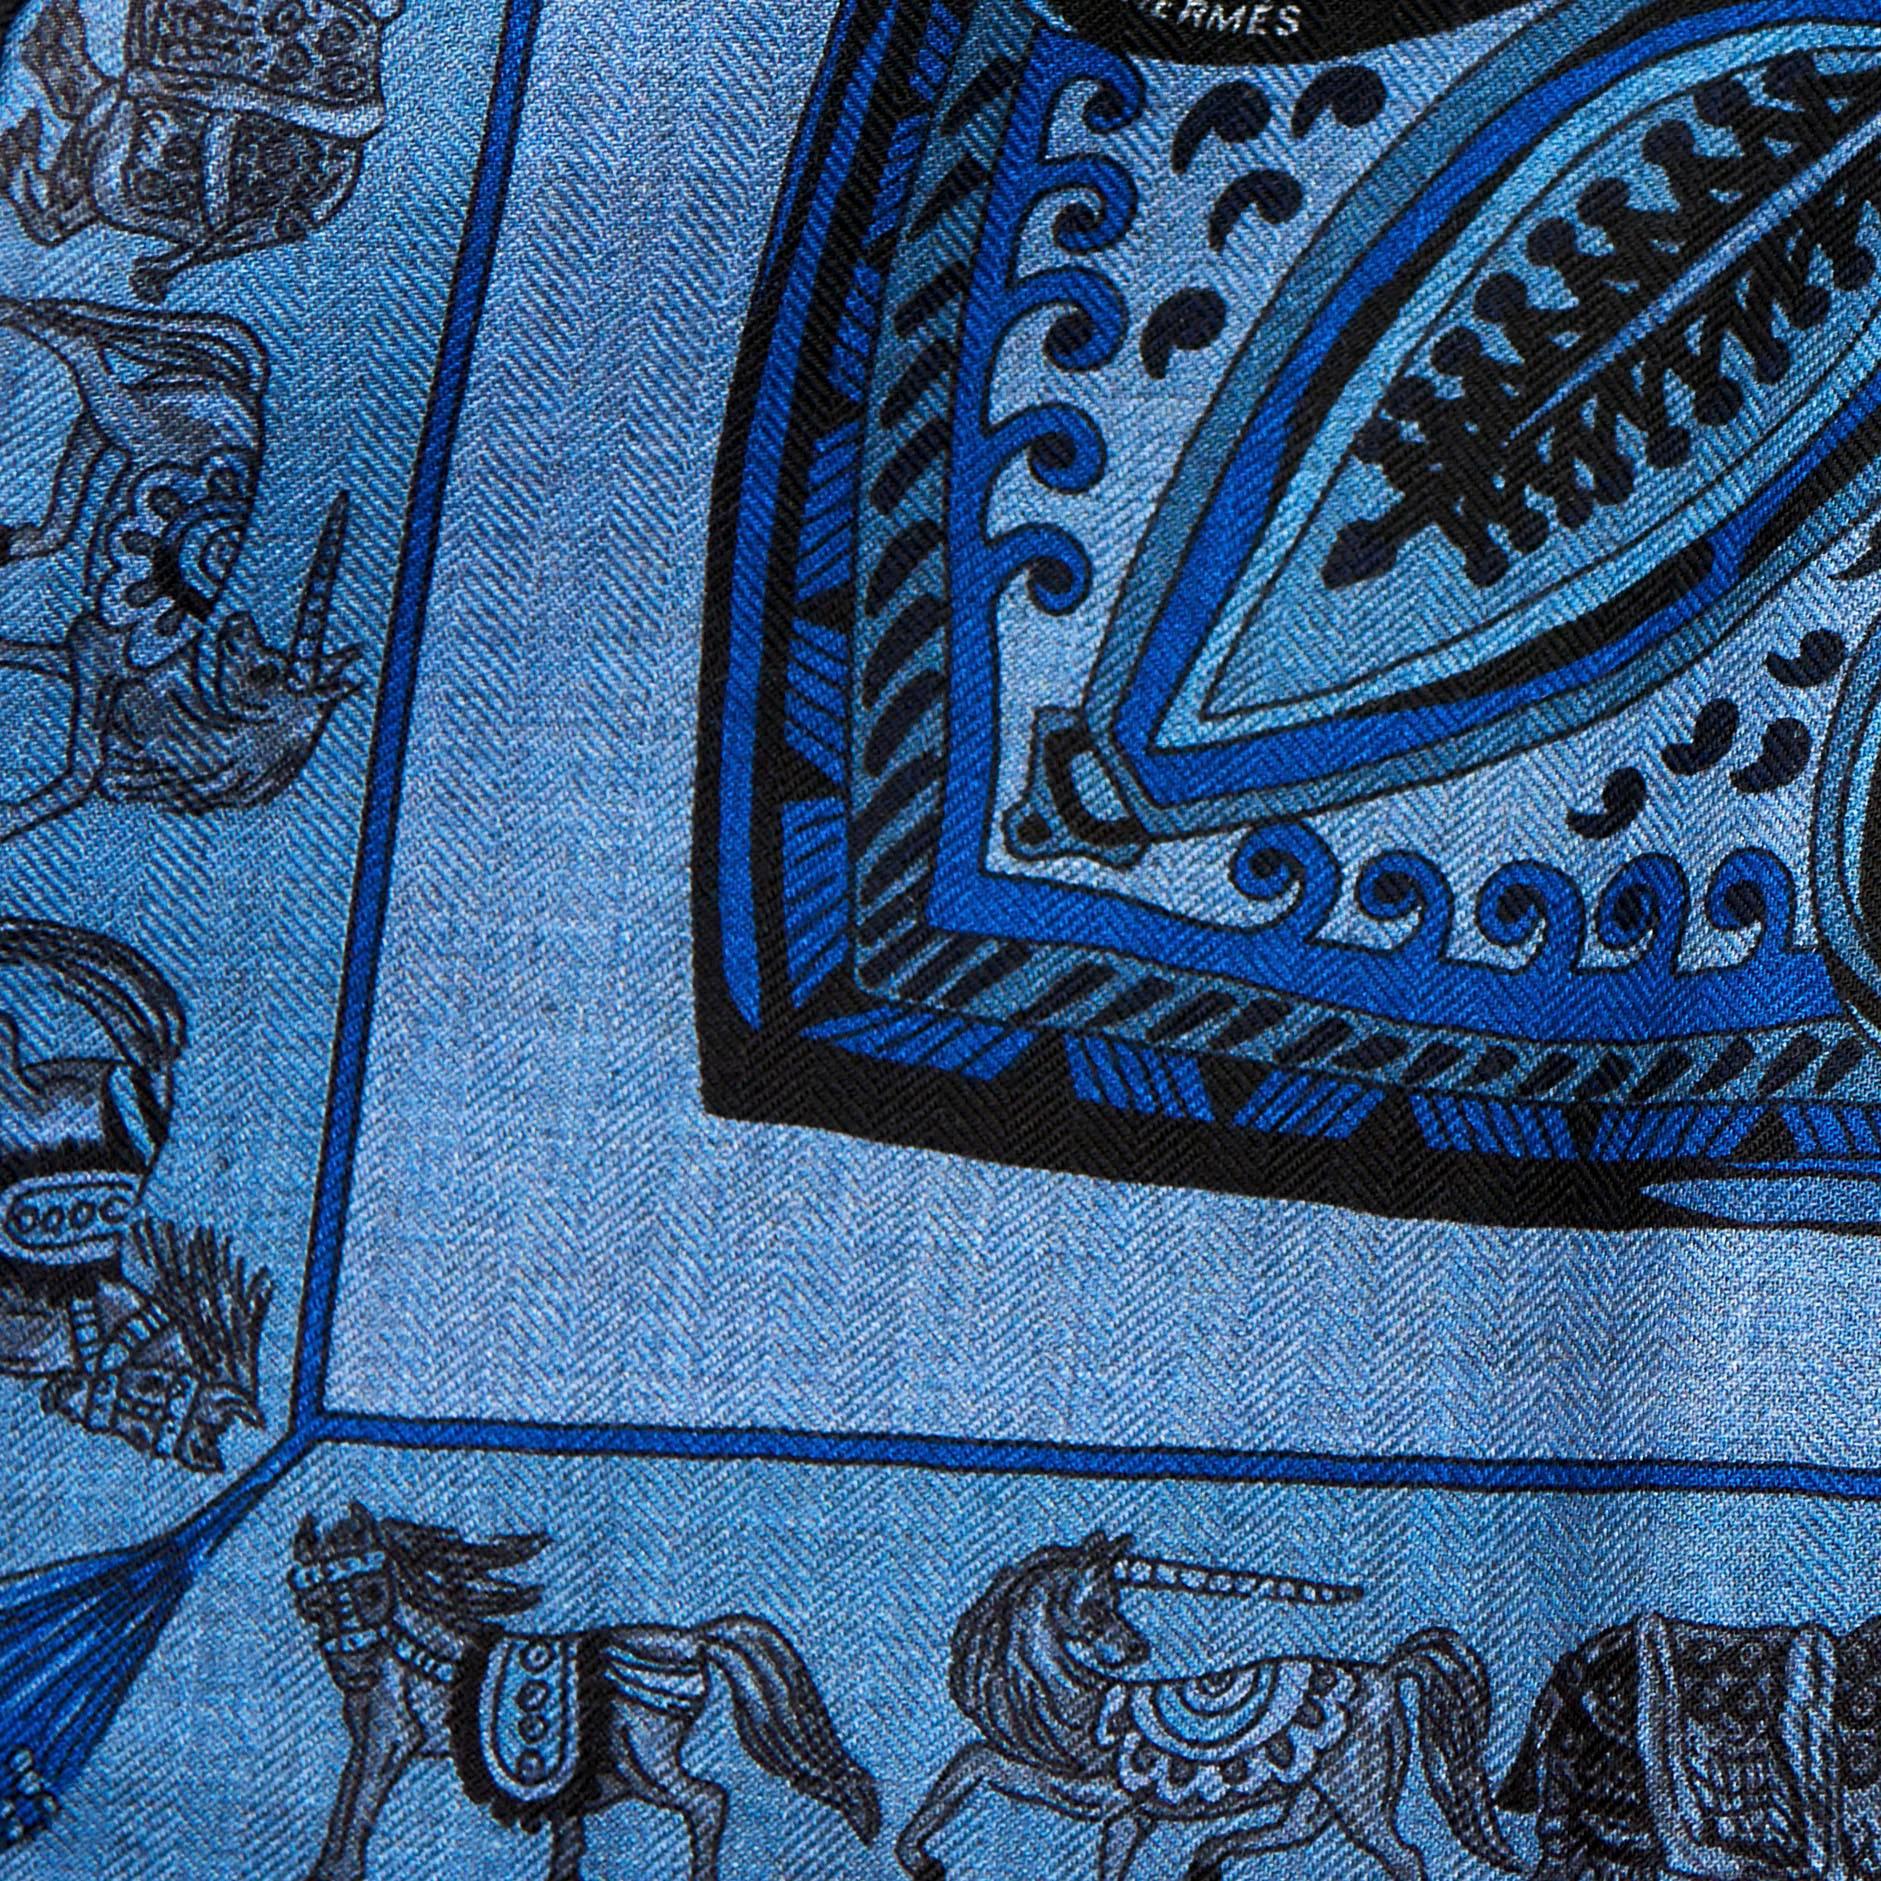 Hermes Mughal Garden and Nature Blue Cashmere Silk Shawl Scarf GM 2